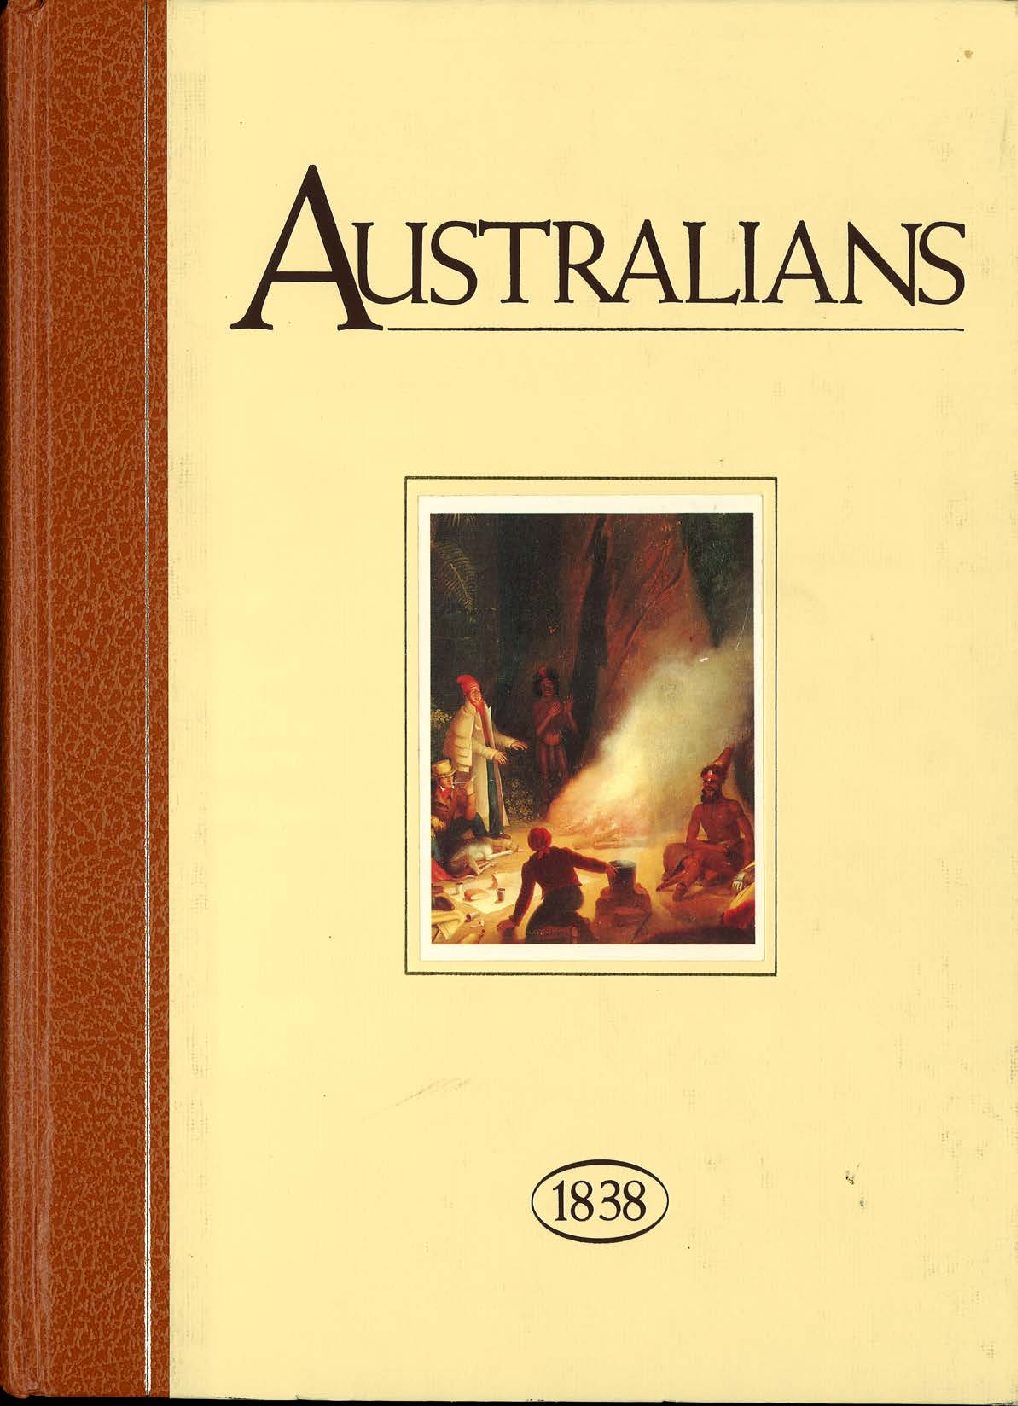 Australians 1838 Chapter 2 – At The Boundaries